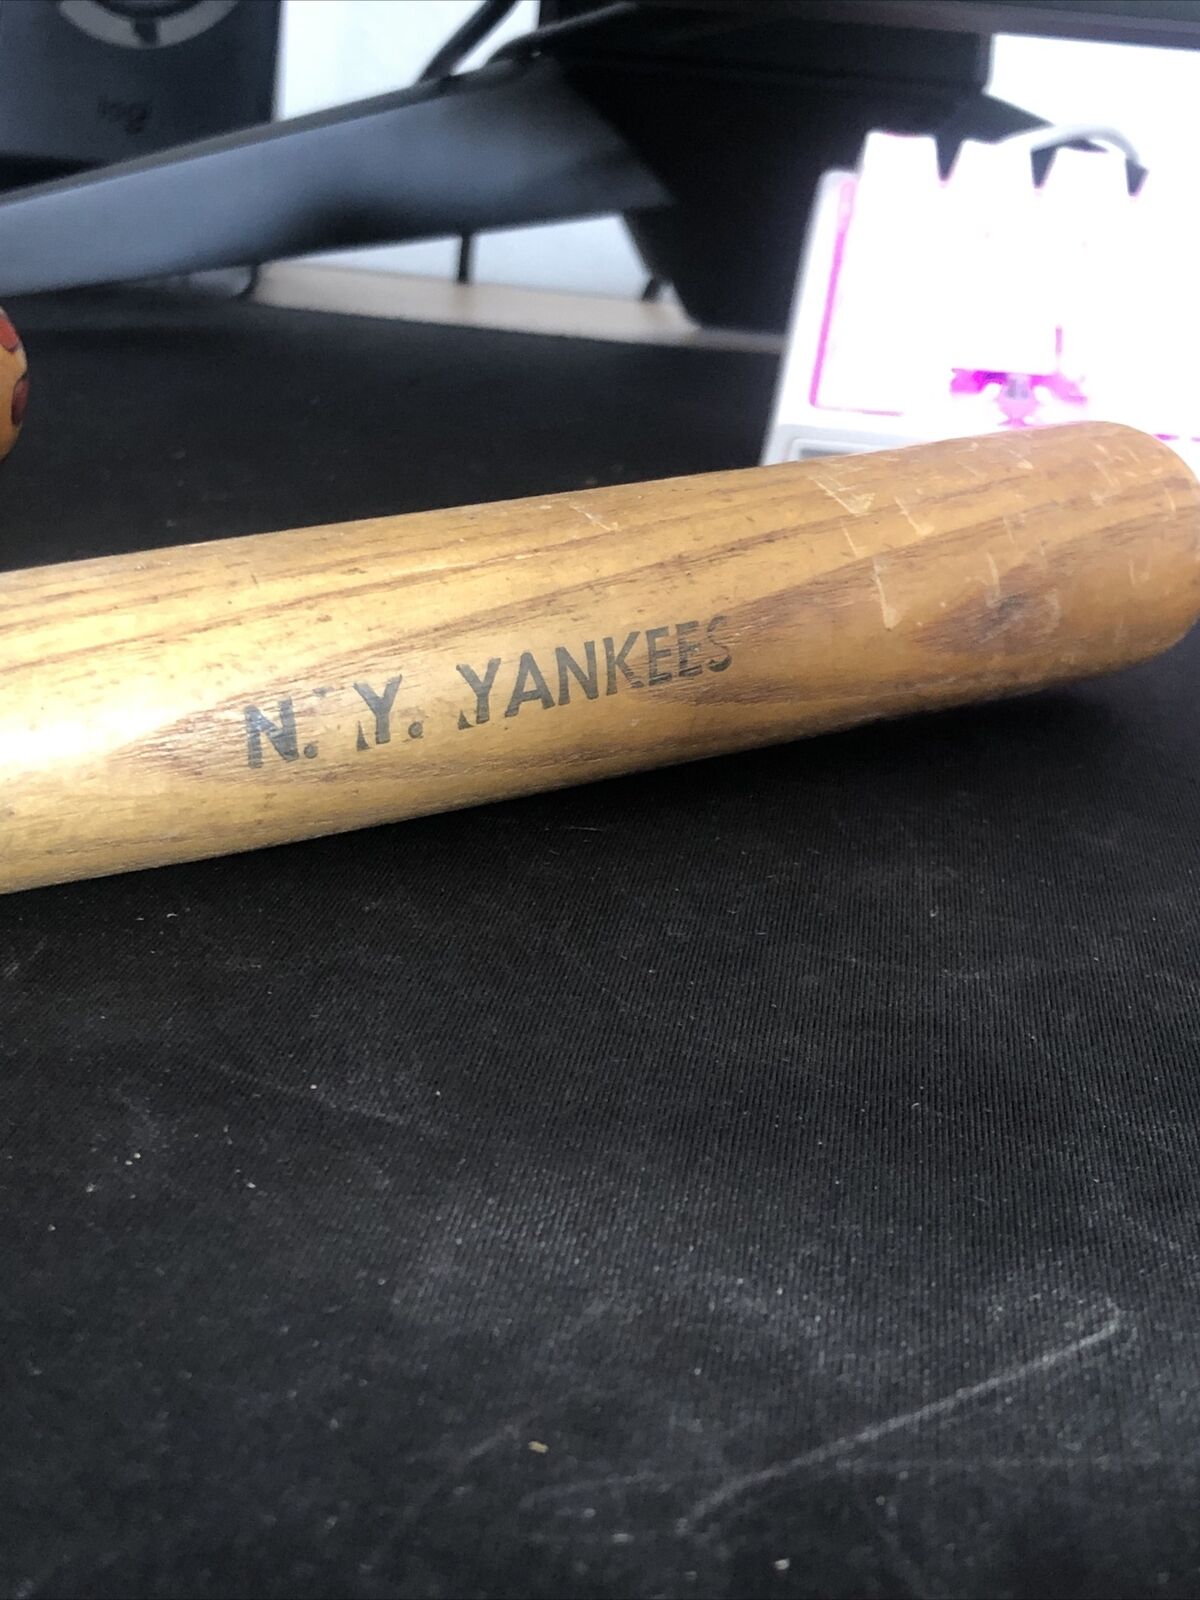 Vintage 1950s New York Yankees Miami Mall Mini Berra Bat Sales of SALE items from new works Maris Mantle DiMag